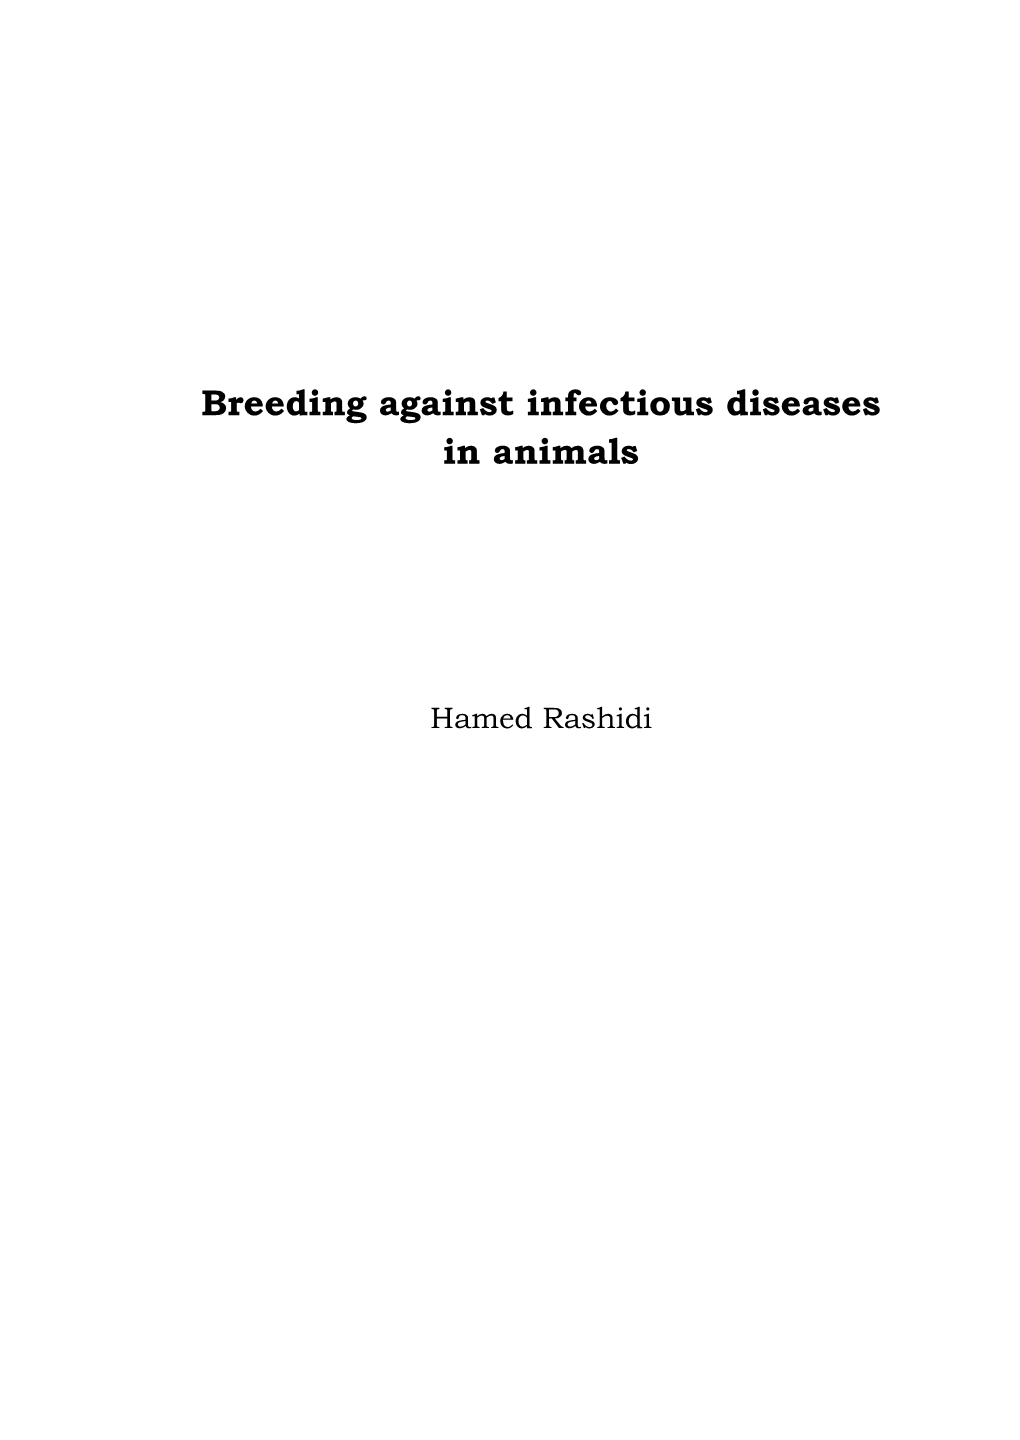 Breeding Against Infectious Diseases in Animals